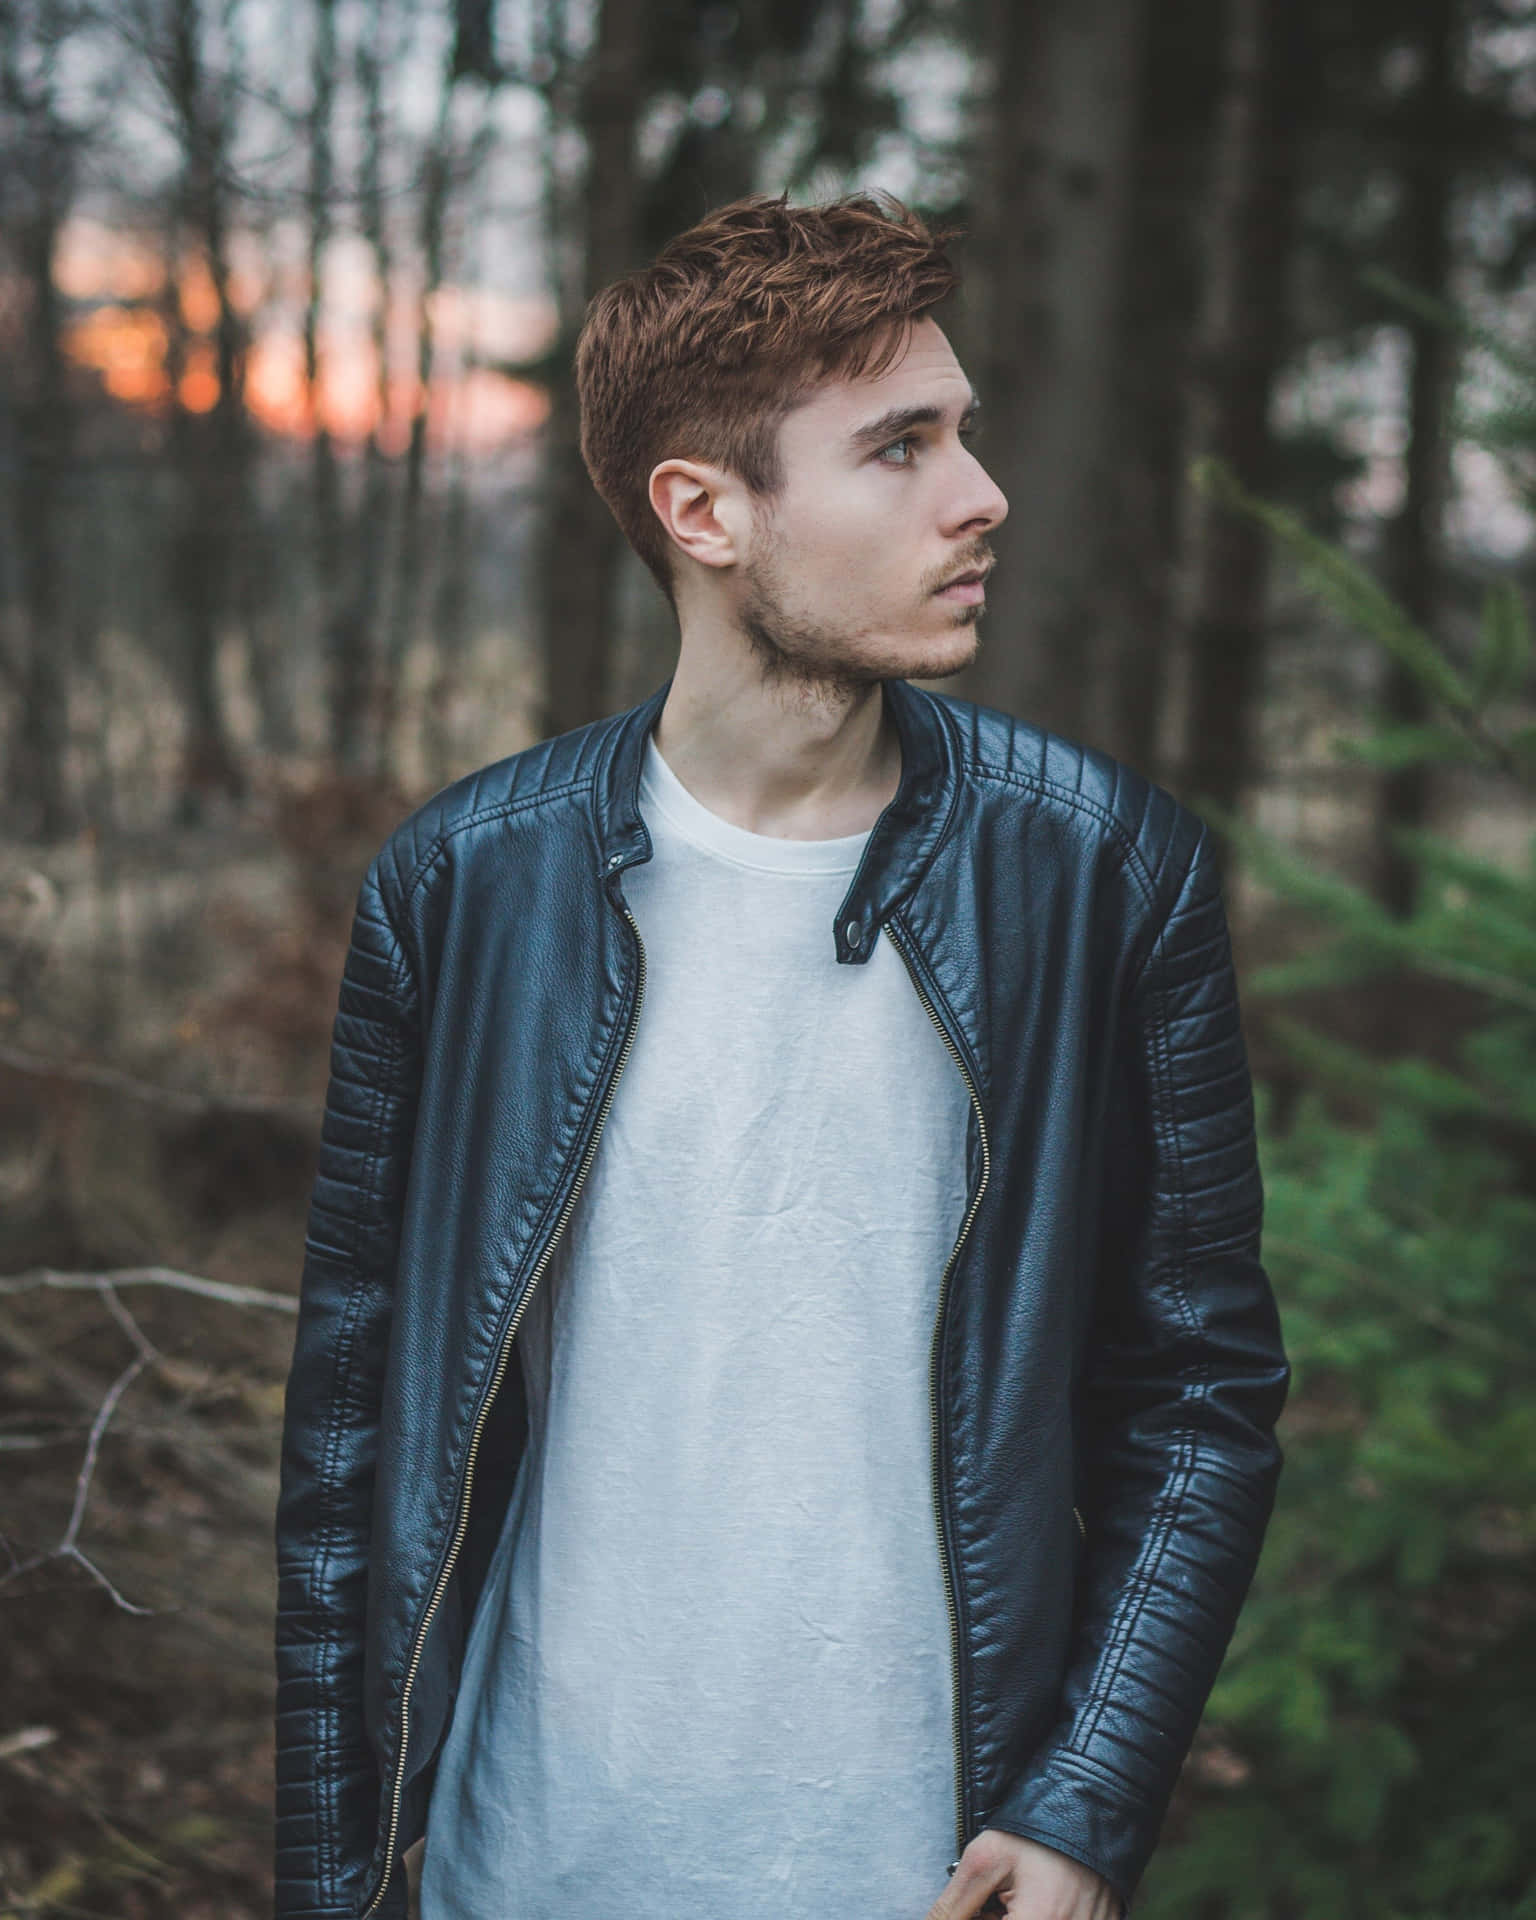 A Man In A Leather Jacket Standing In The Woods